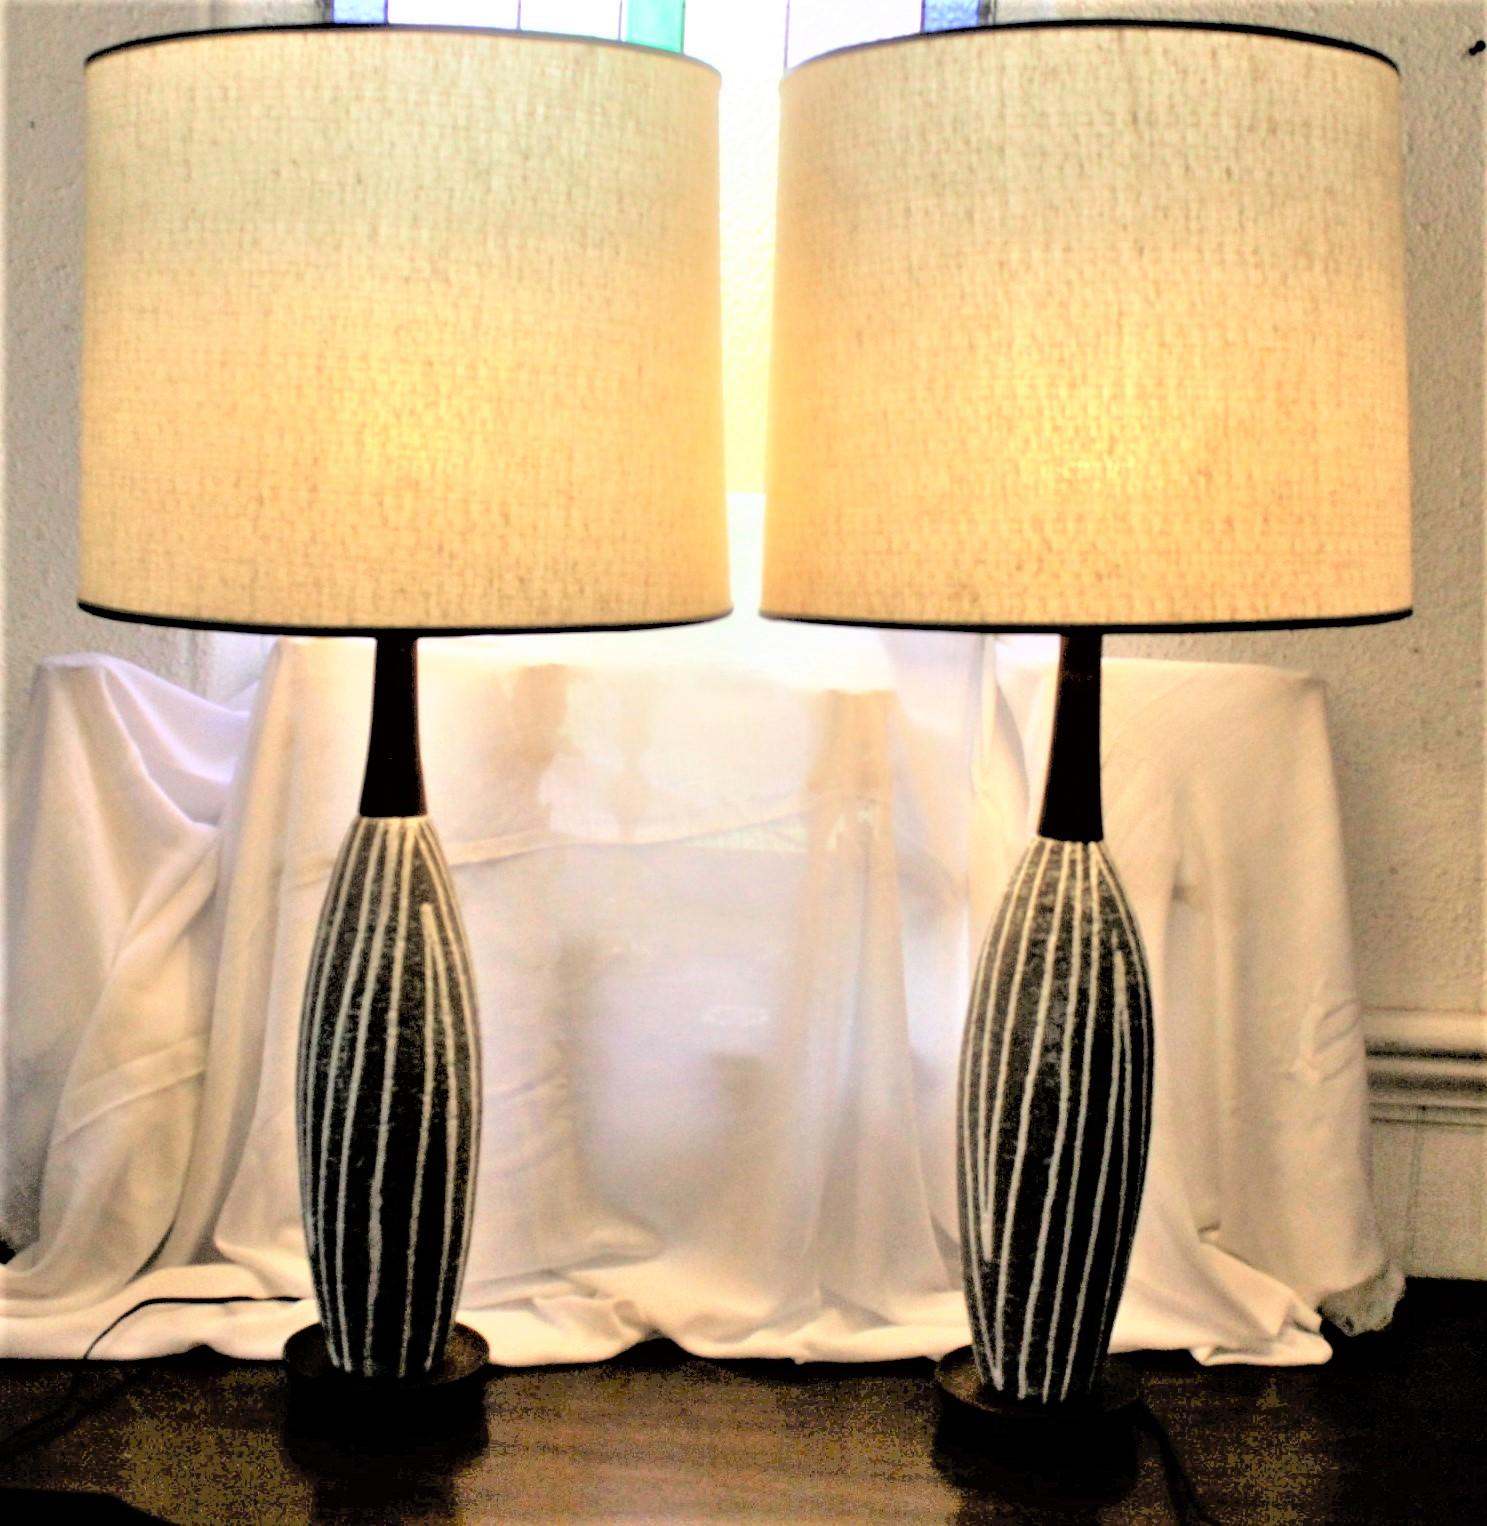 This pair of Mid-Century Modern pottery table lamps were made by the Swedish art potter Upsala Ekeby in approximately 1965. The lamps are done with a green or turquoise glaze with cream swirled lines running horizontally on the textured bodies of